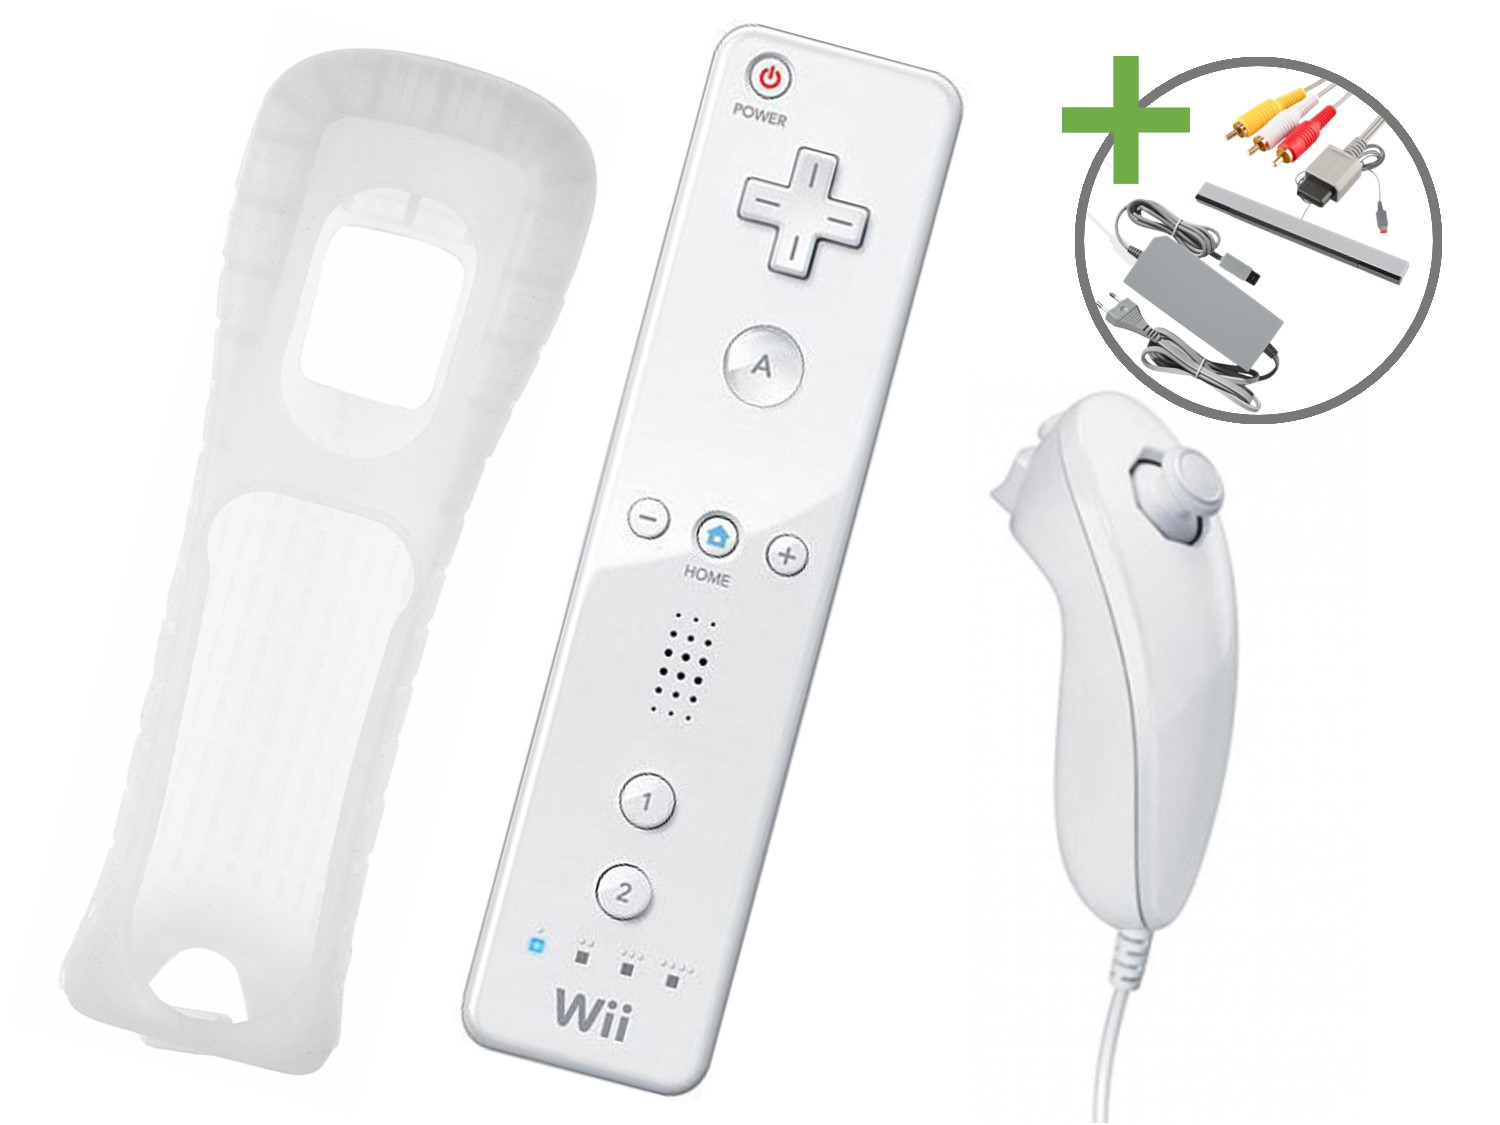 Nintendo Wii Starter Pack - The First of January Edition - Wii Hardware - 3